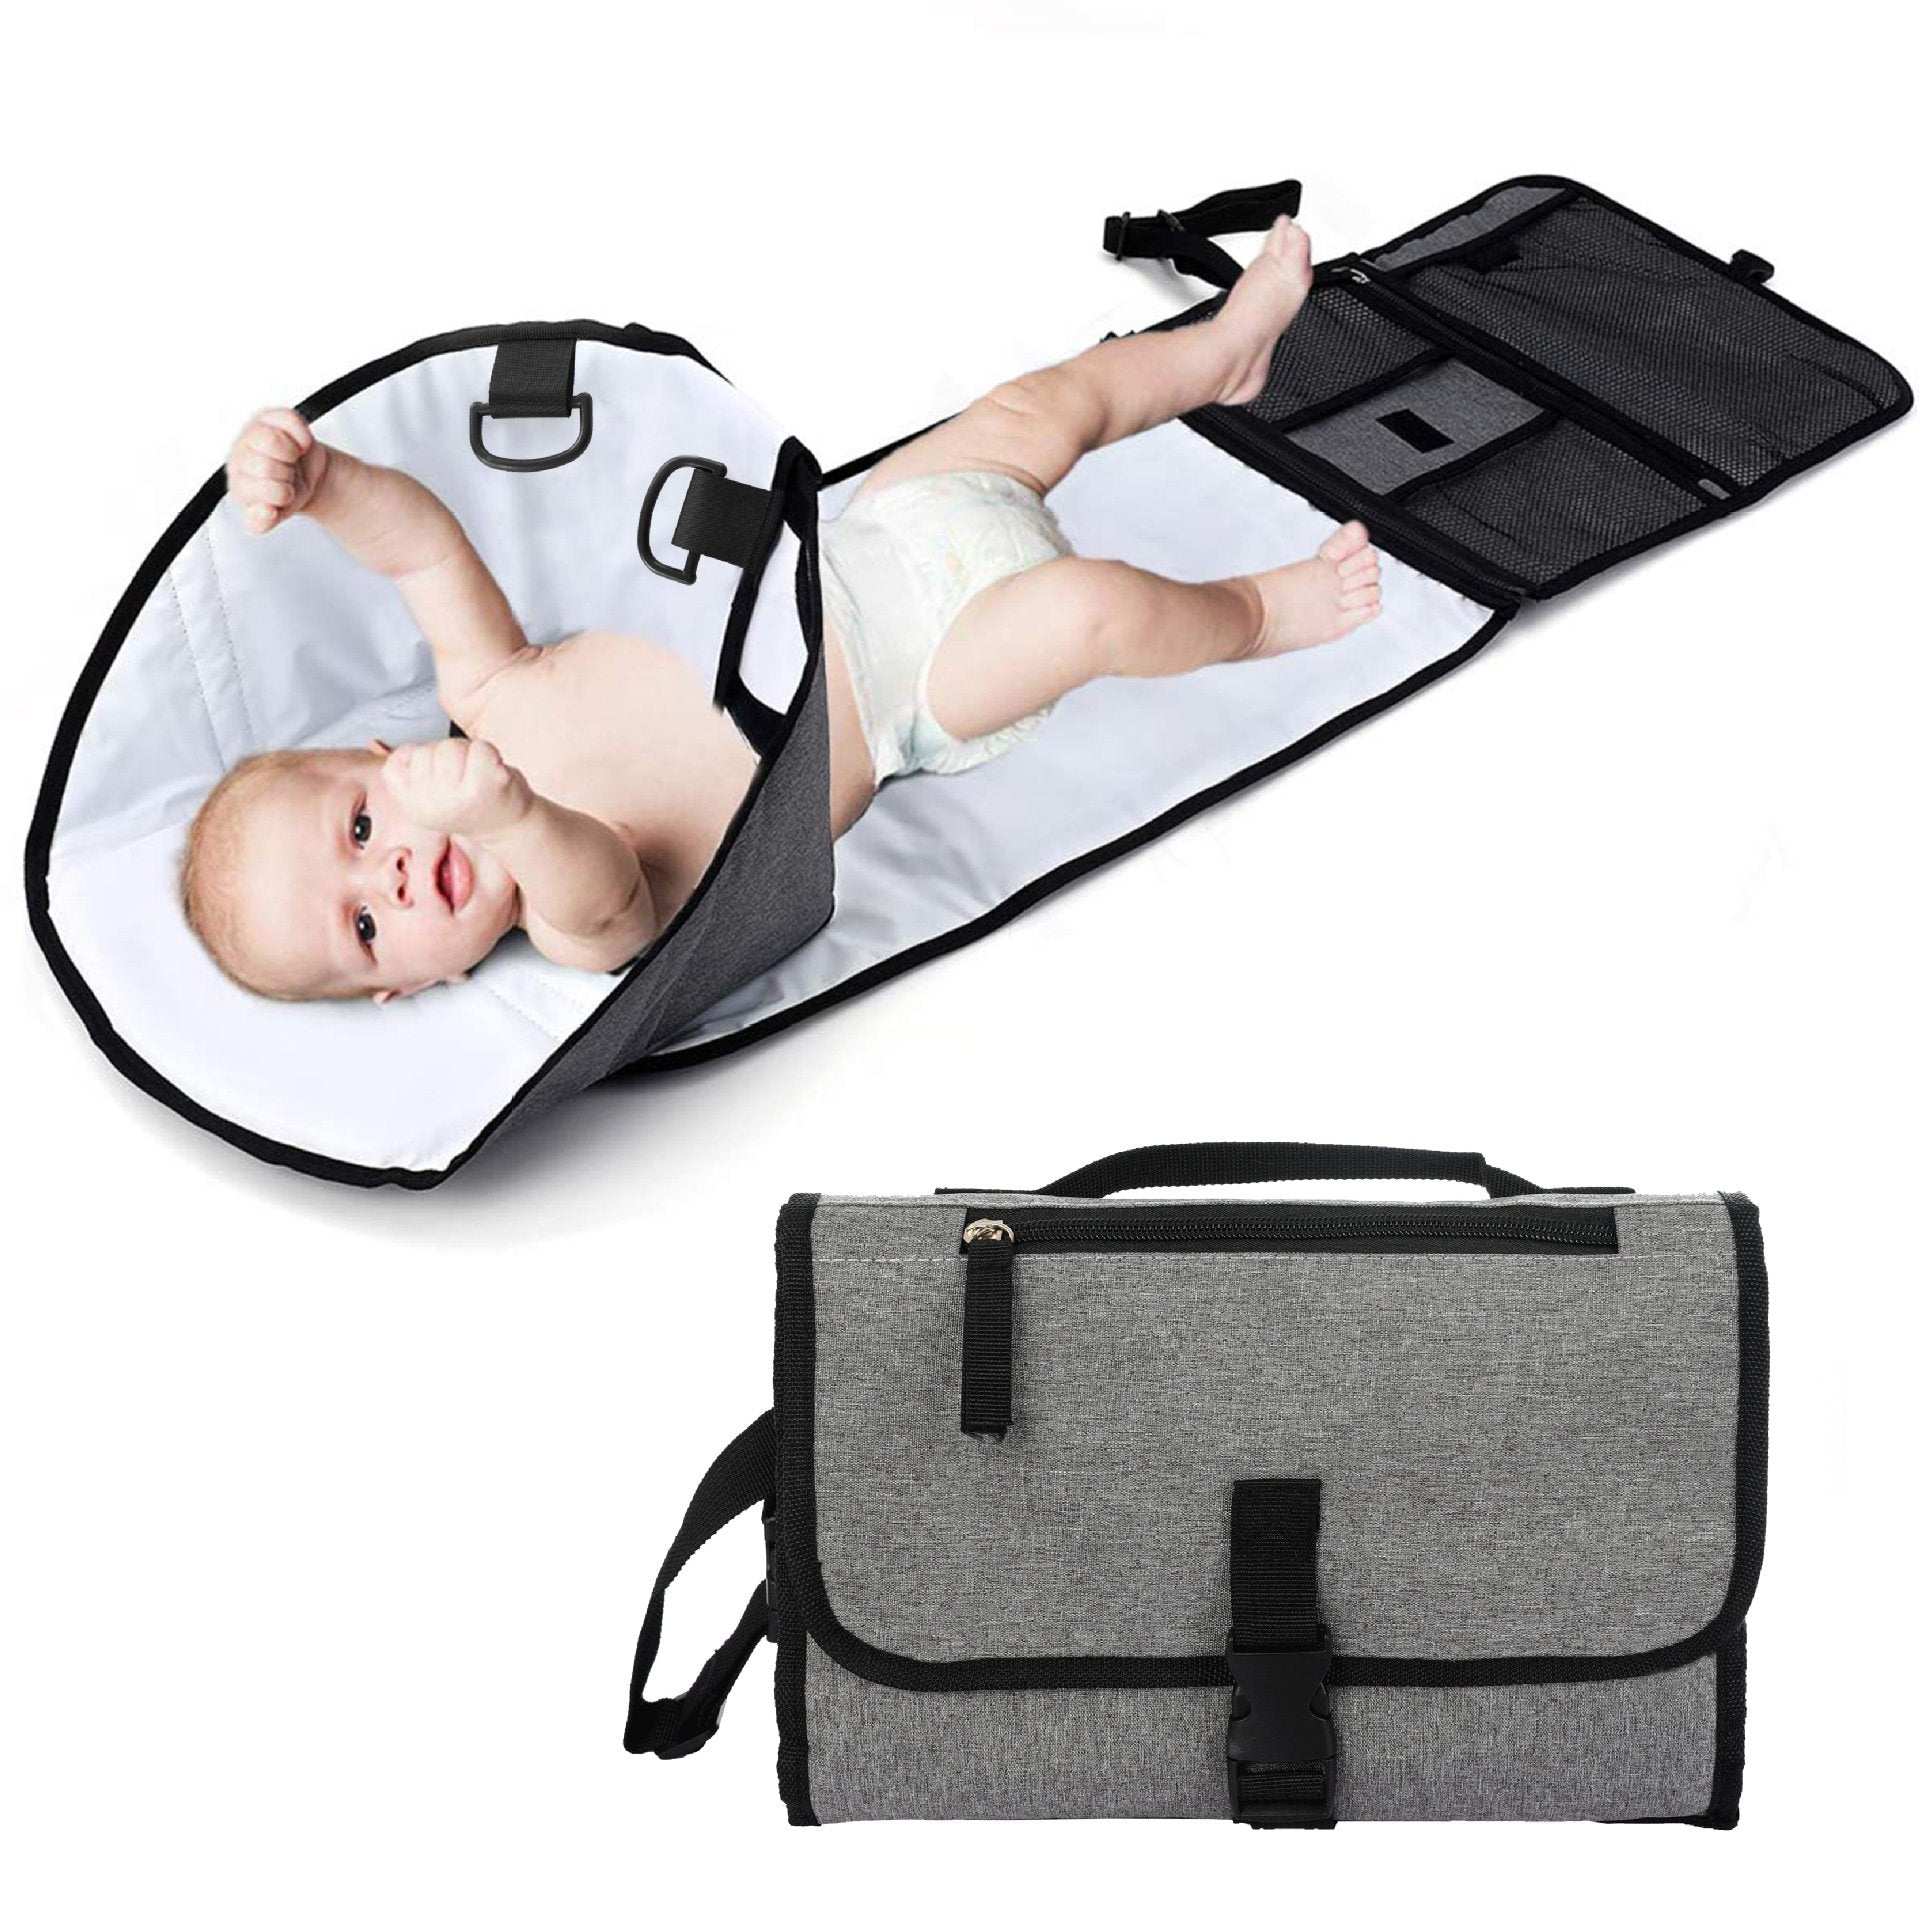 Baby Diaper Replacement Pad Waterproof Removable Foldable Bag